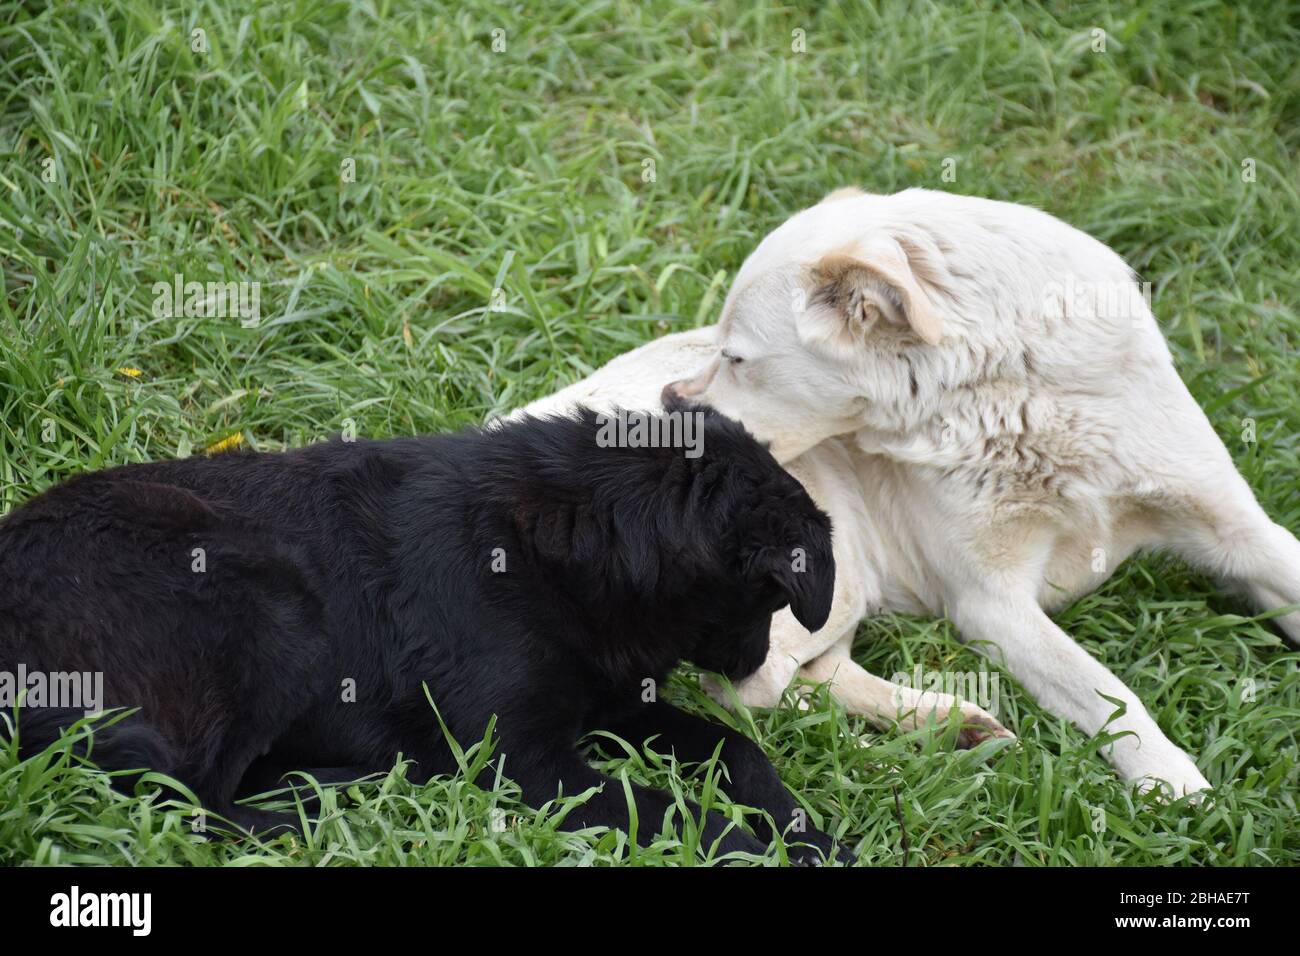 Two dogs are lying on the grass and enjoying themselves together Stock Photo